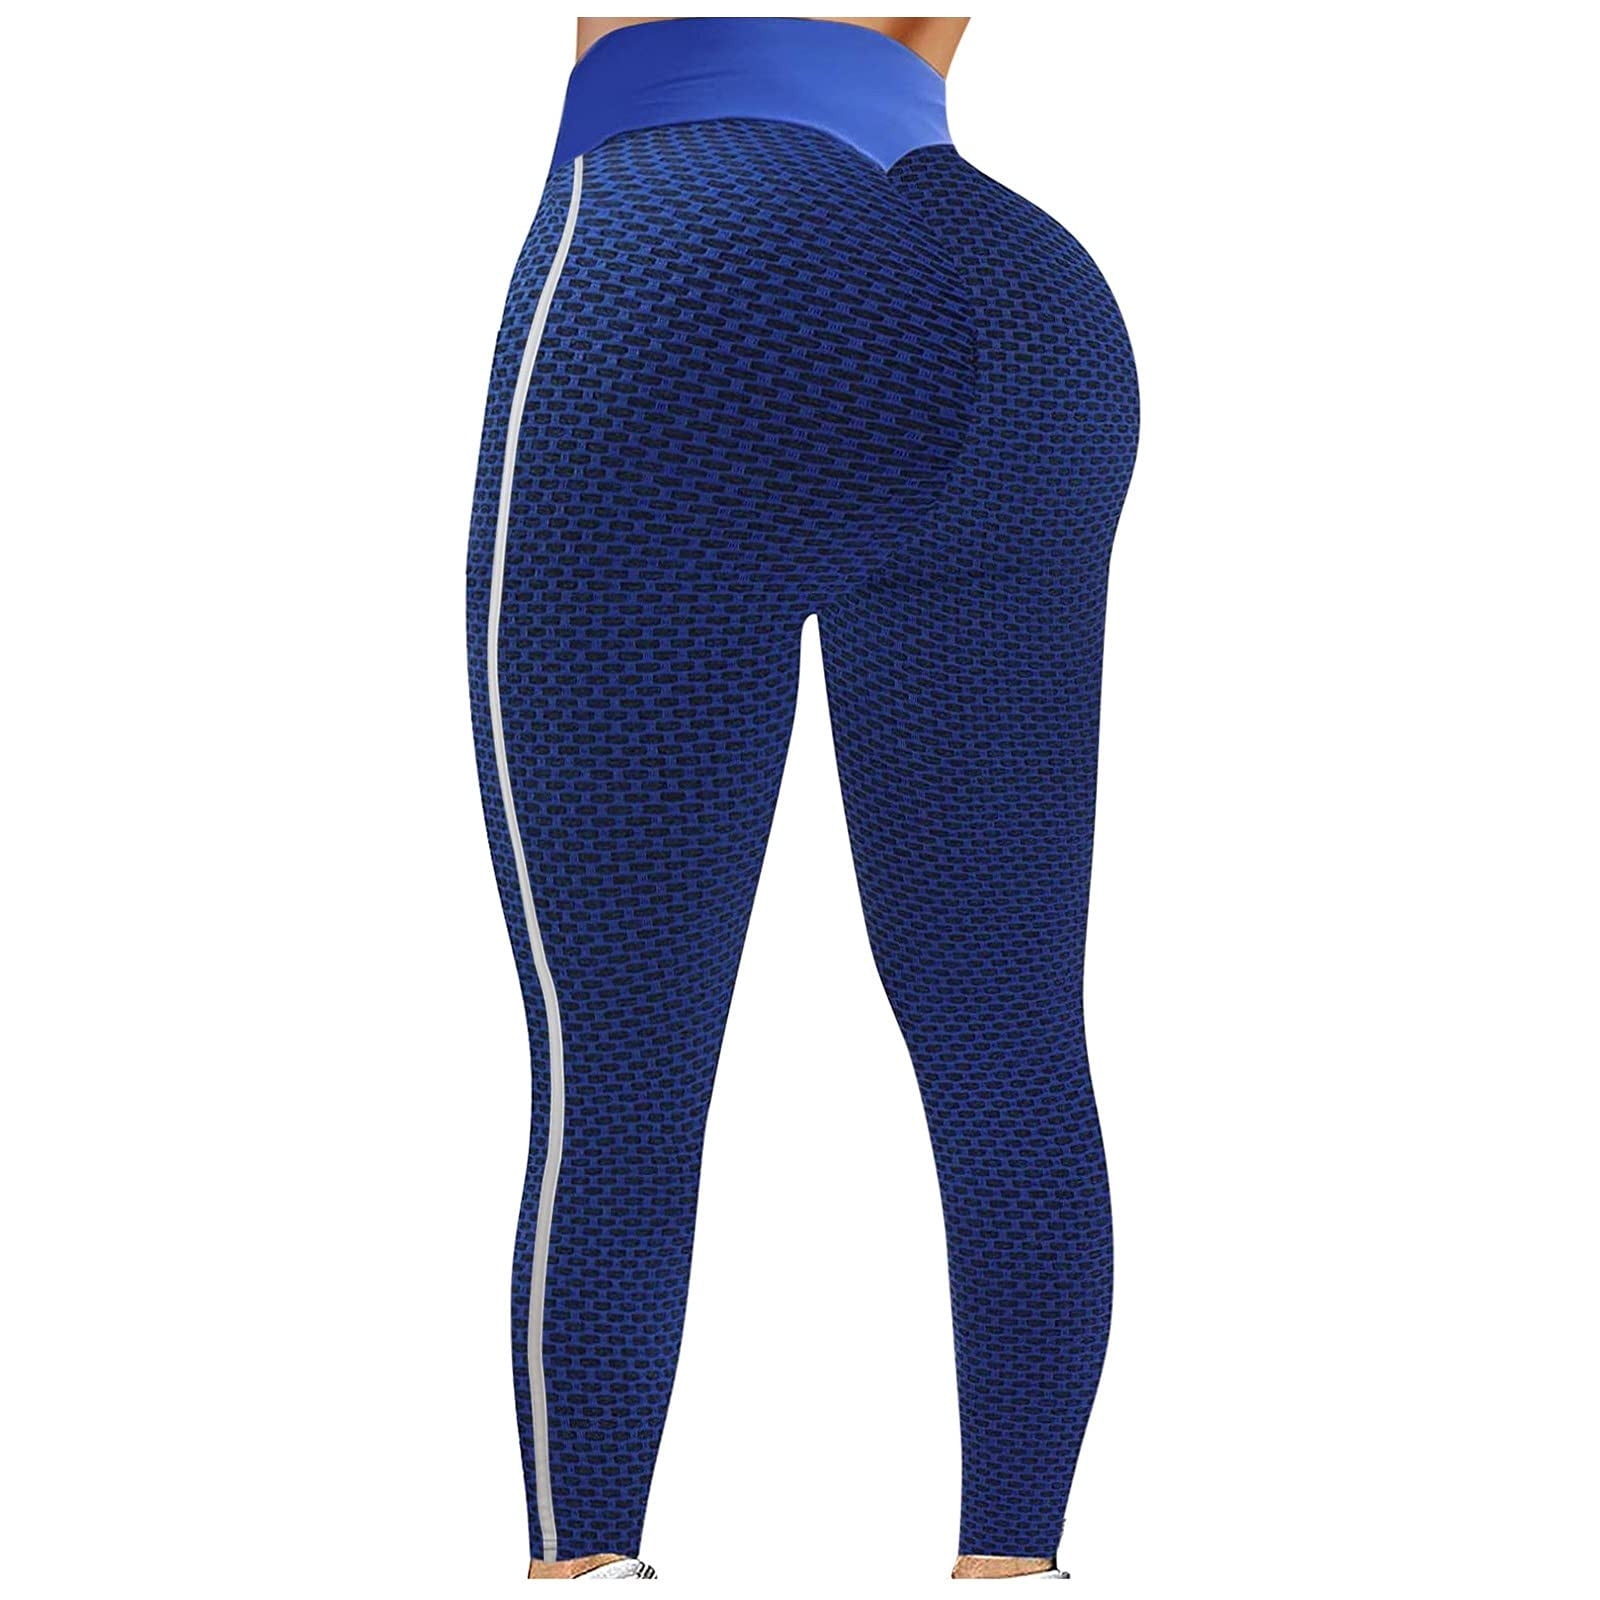 WBQ High Waist Band Leggings for Women,Full-Length Control Slimming Yoga Pants  for Workout Running Jogging Pilates Compression Leggings with Side  Pockets,S-3XL Blue 